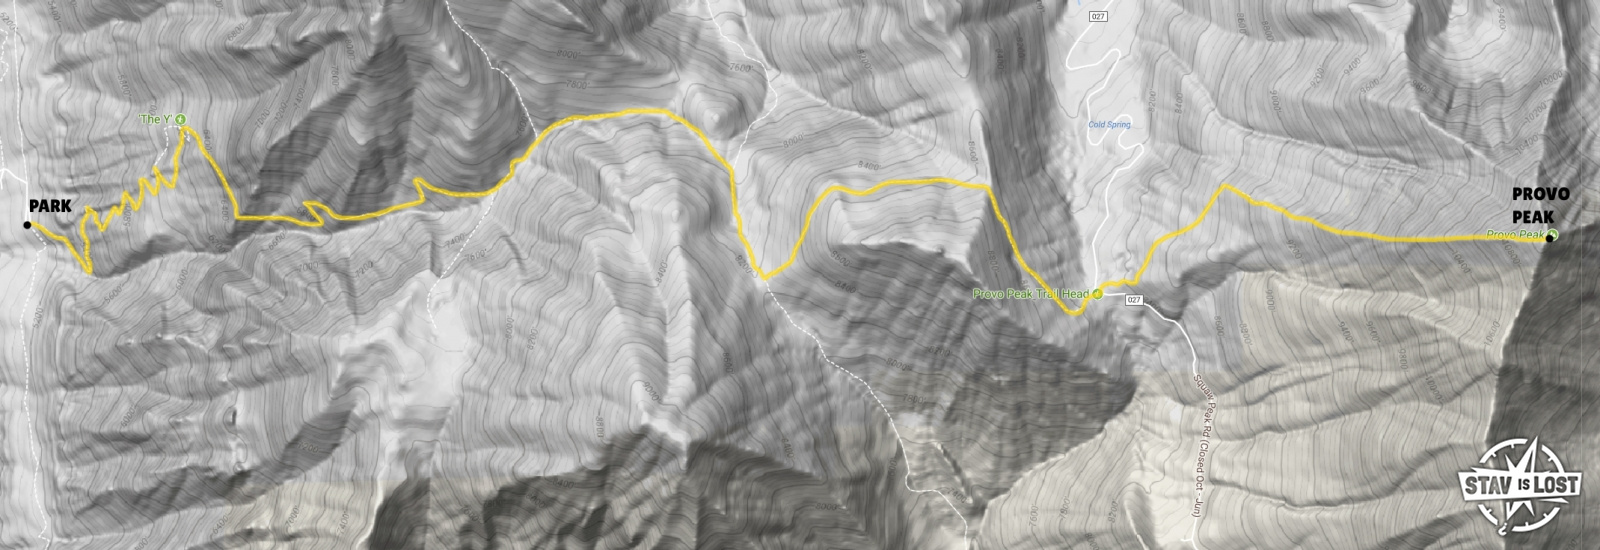 map for Provo Peak via Slide Canyon Trail by stav is lost